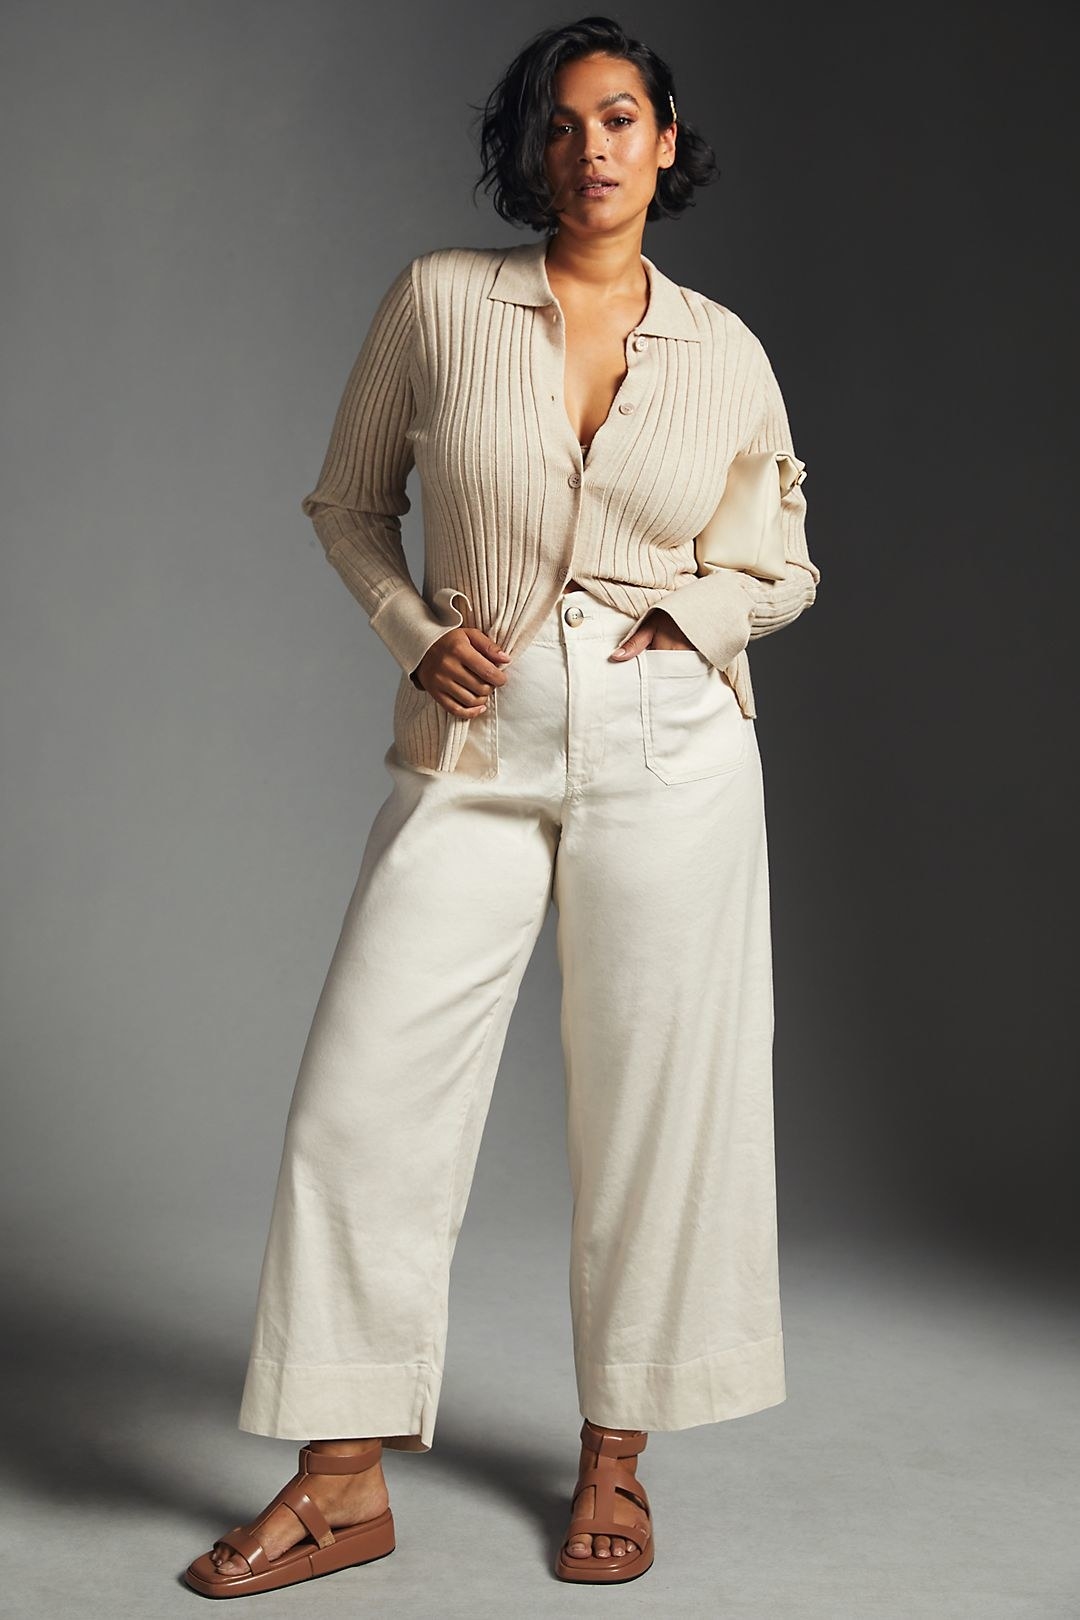 model in high-waisted off-white wide-leg pants